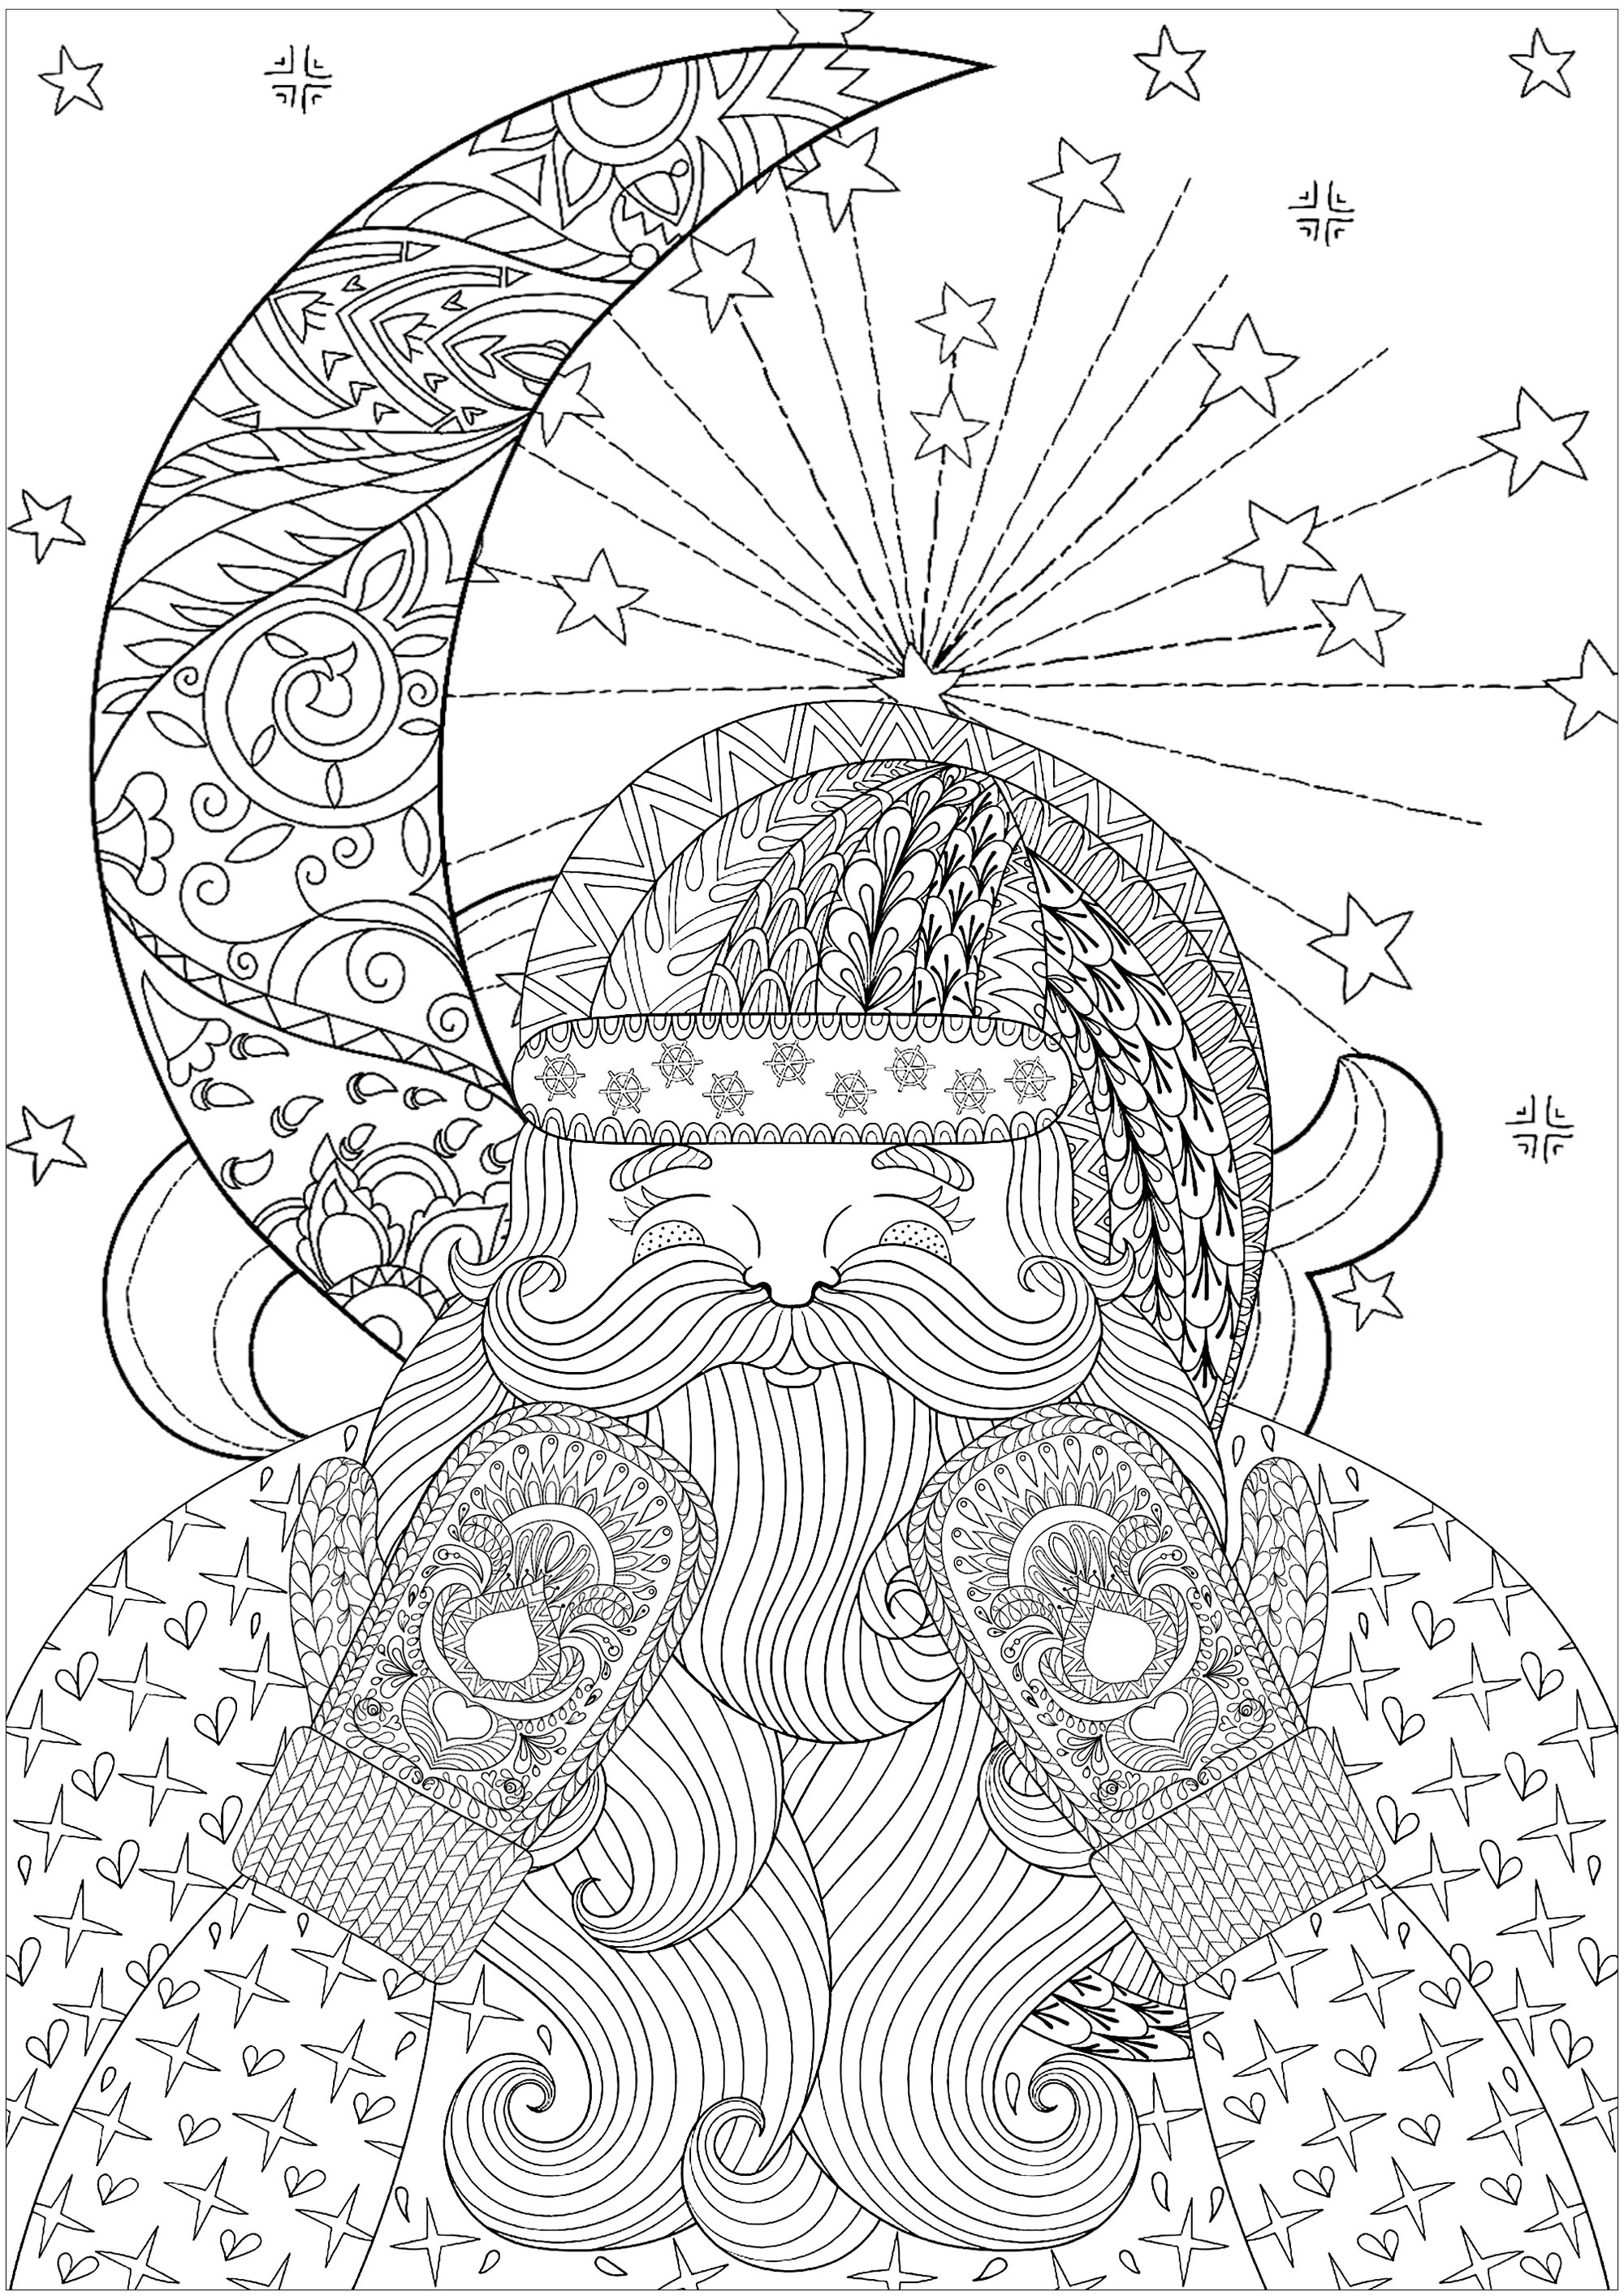  Christmas  Cookies Coloring  Pages  For Adults  Free 